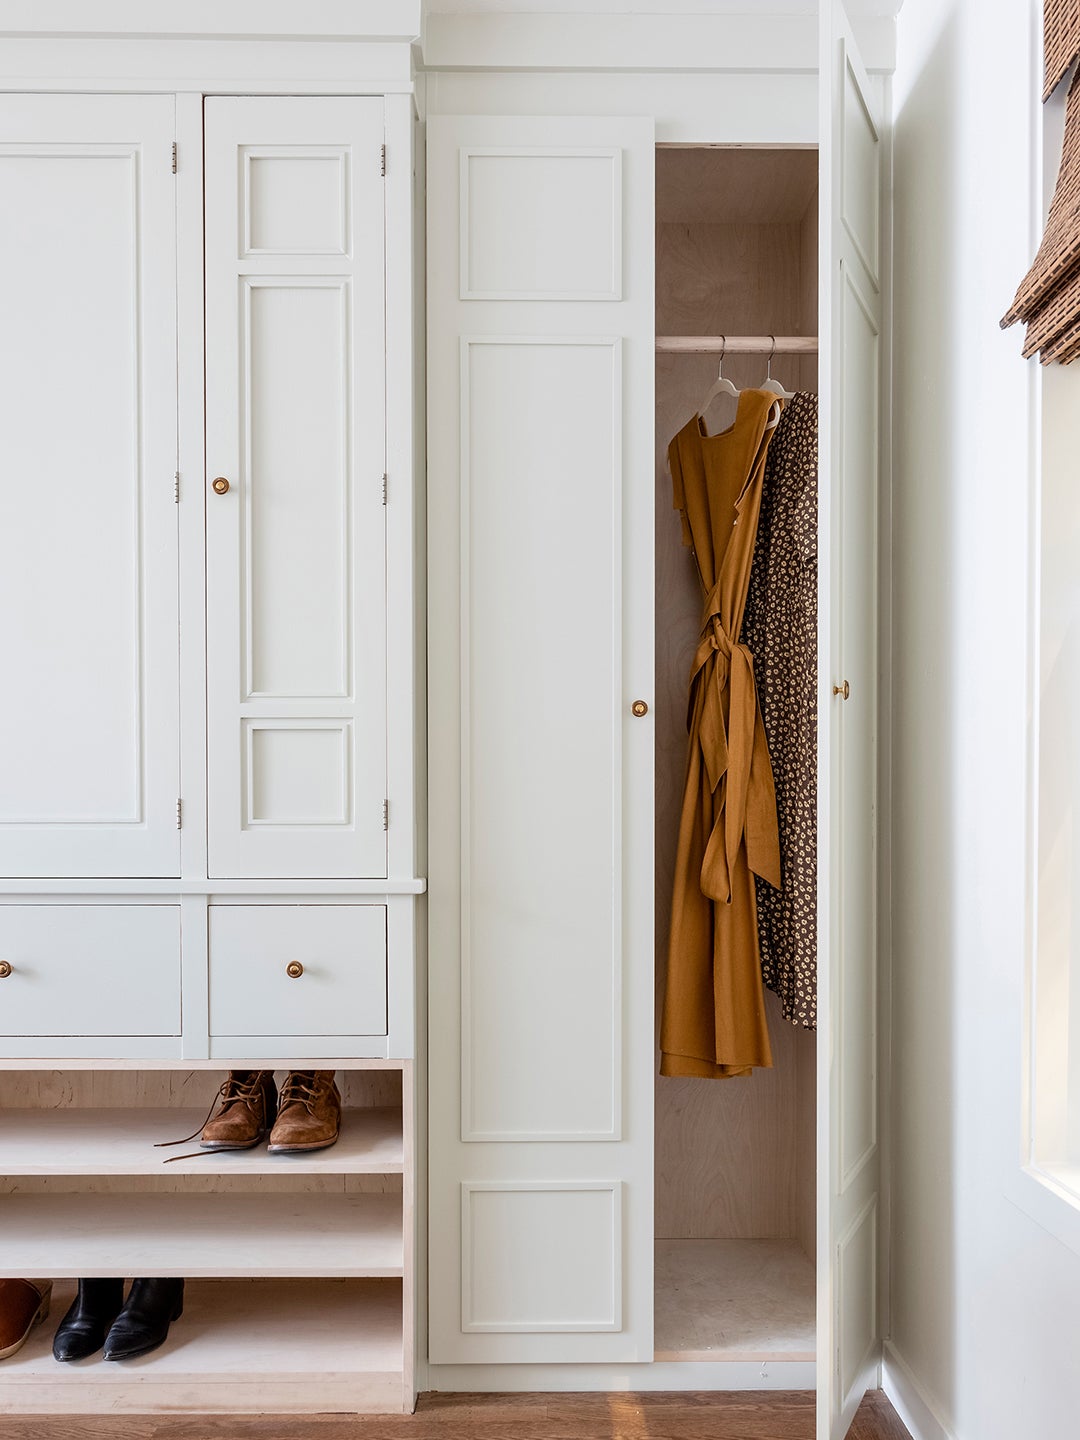 This Custom Wall of Closets Has a Storage Surprise Hidden in the Center